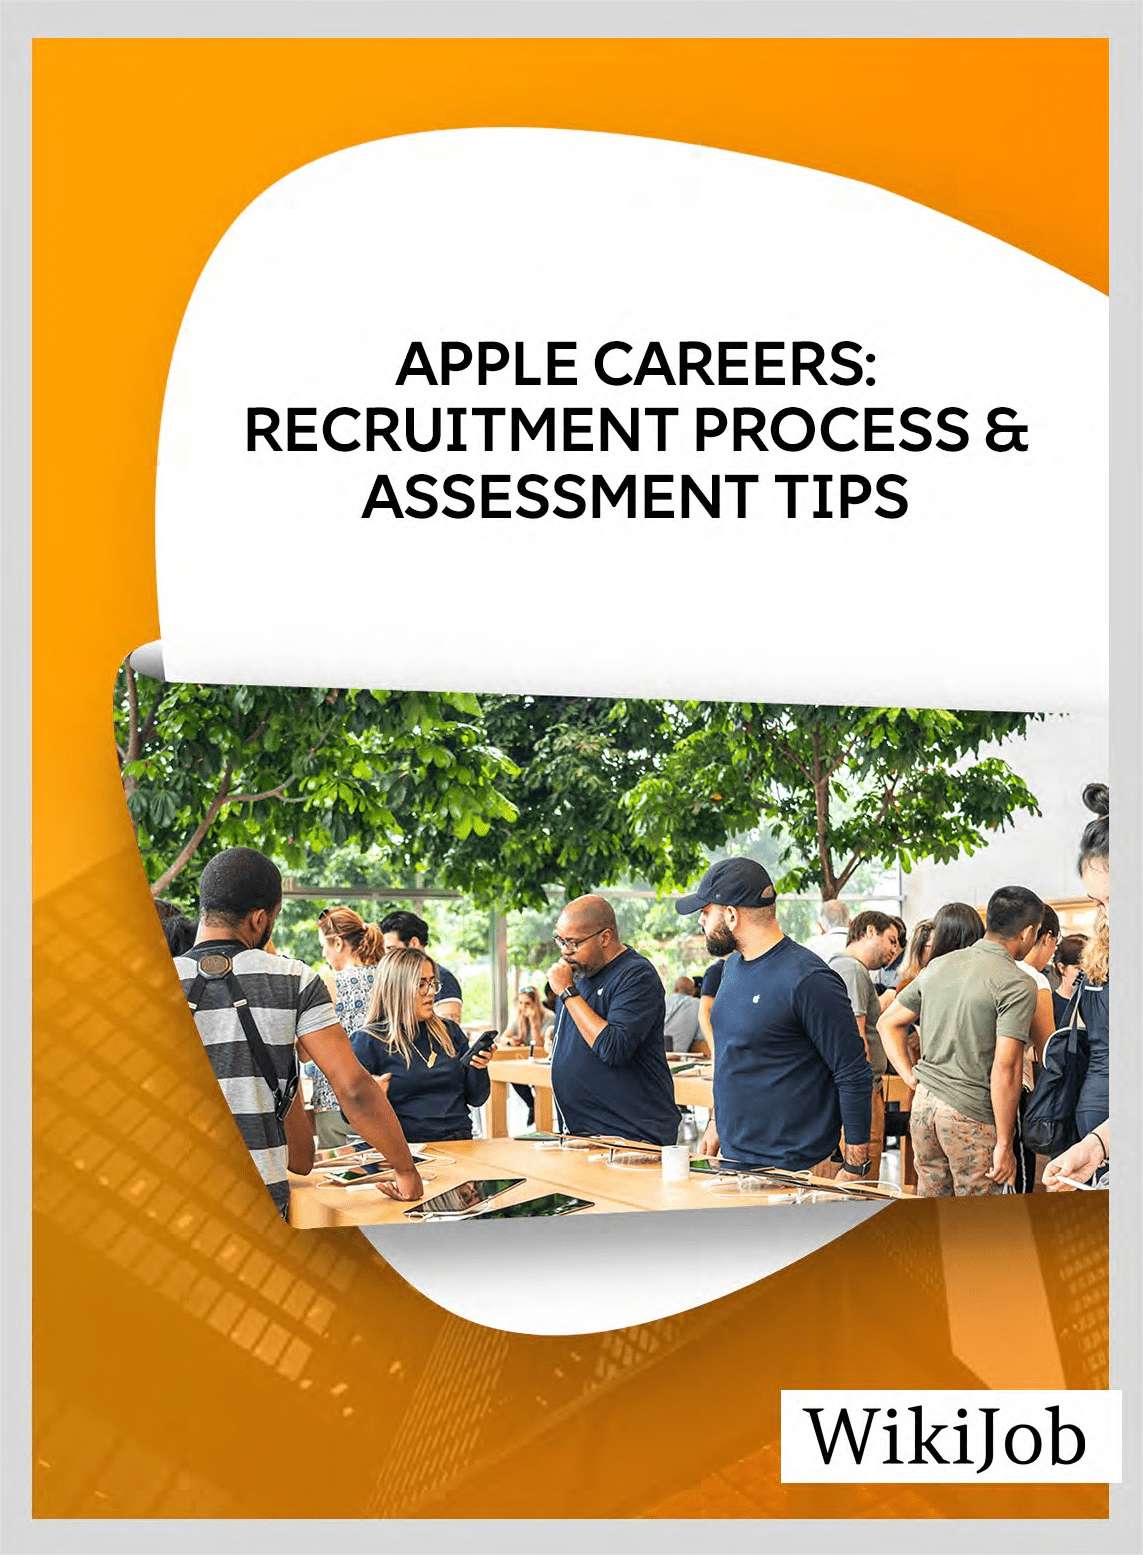 Apple Careers: Recruitment Process & Assessment Tips